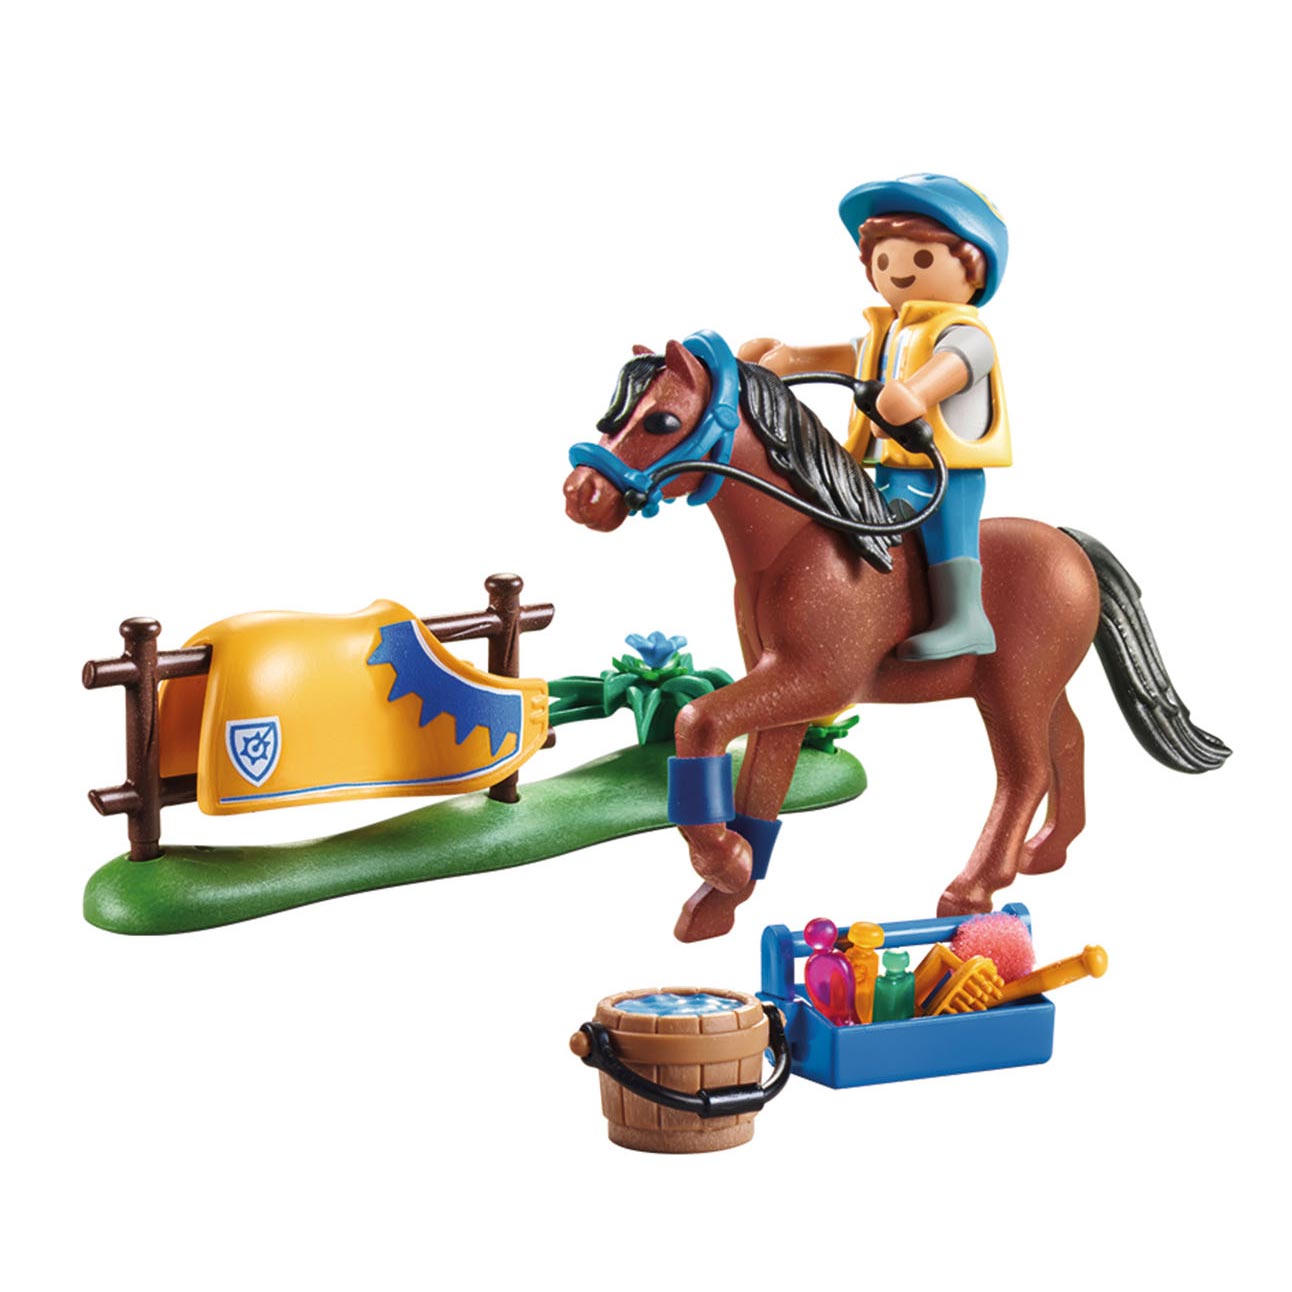 Playmobil Country Collection Pony Welsh - 70523